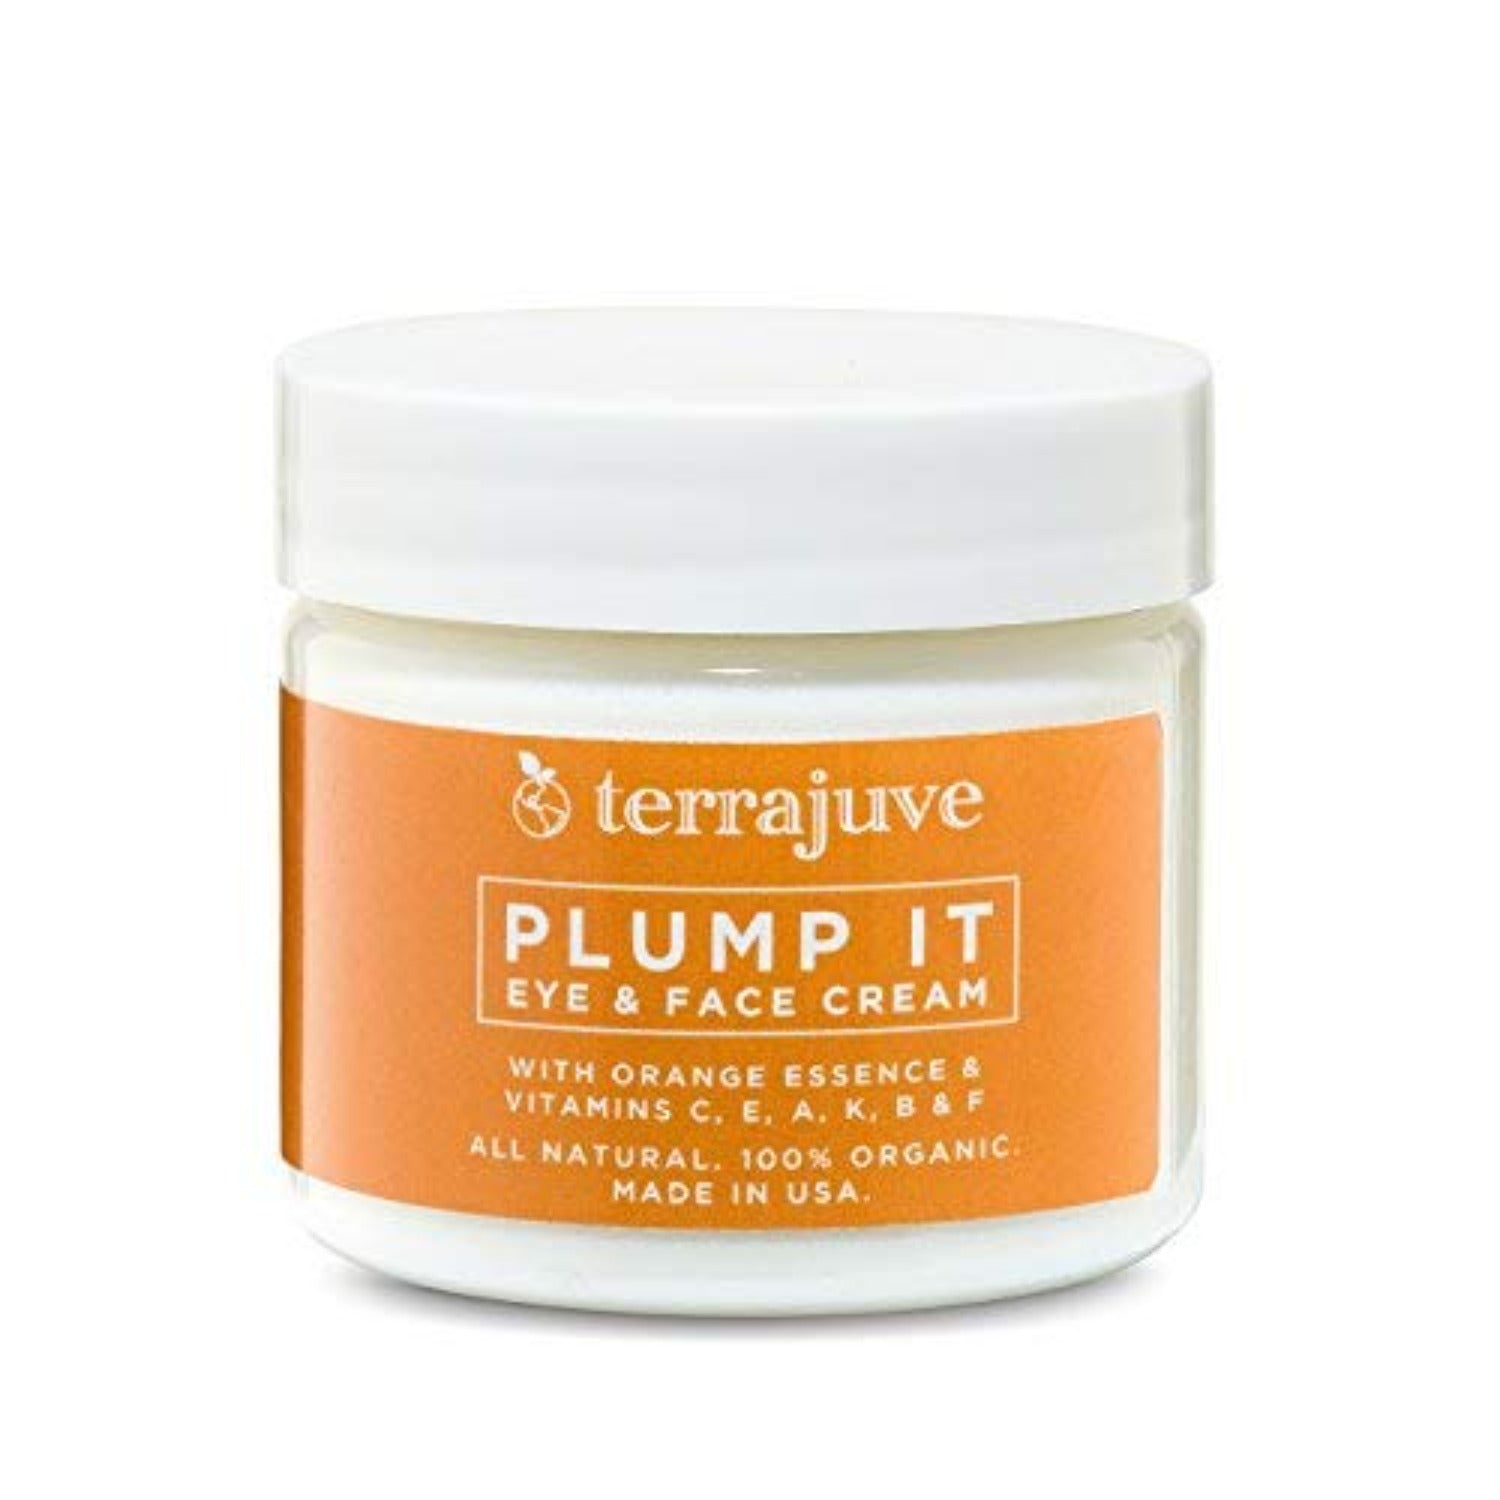 Plump it Eye & Face Moisturizer Cream with Lip Scrub All Natural Organic Wrapped in Organza Bag